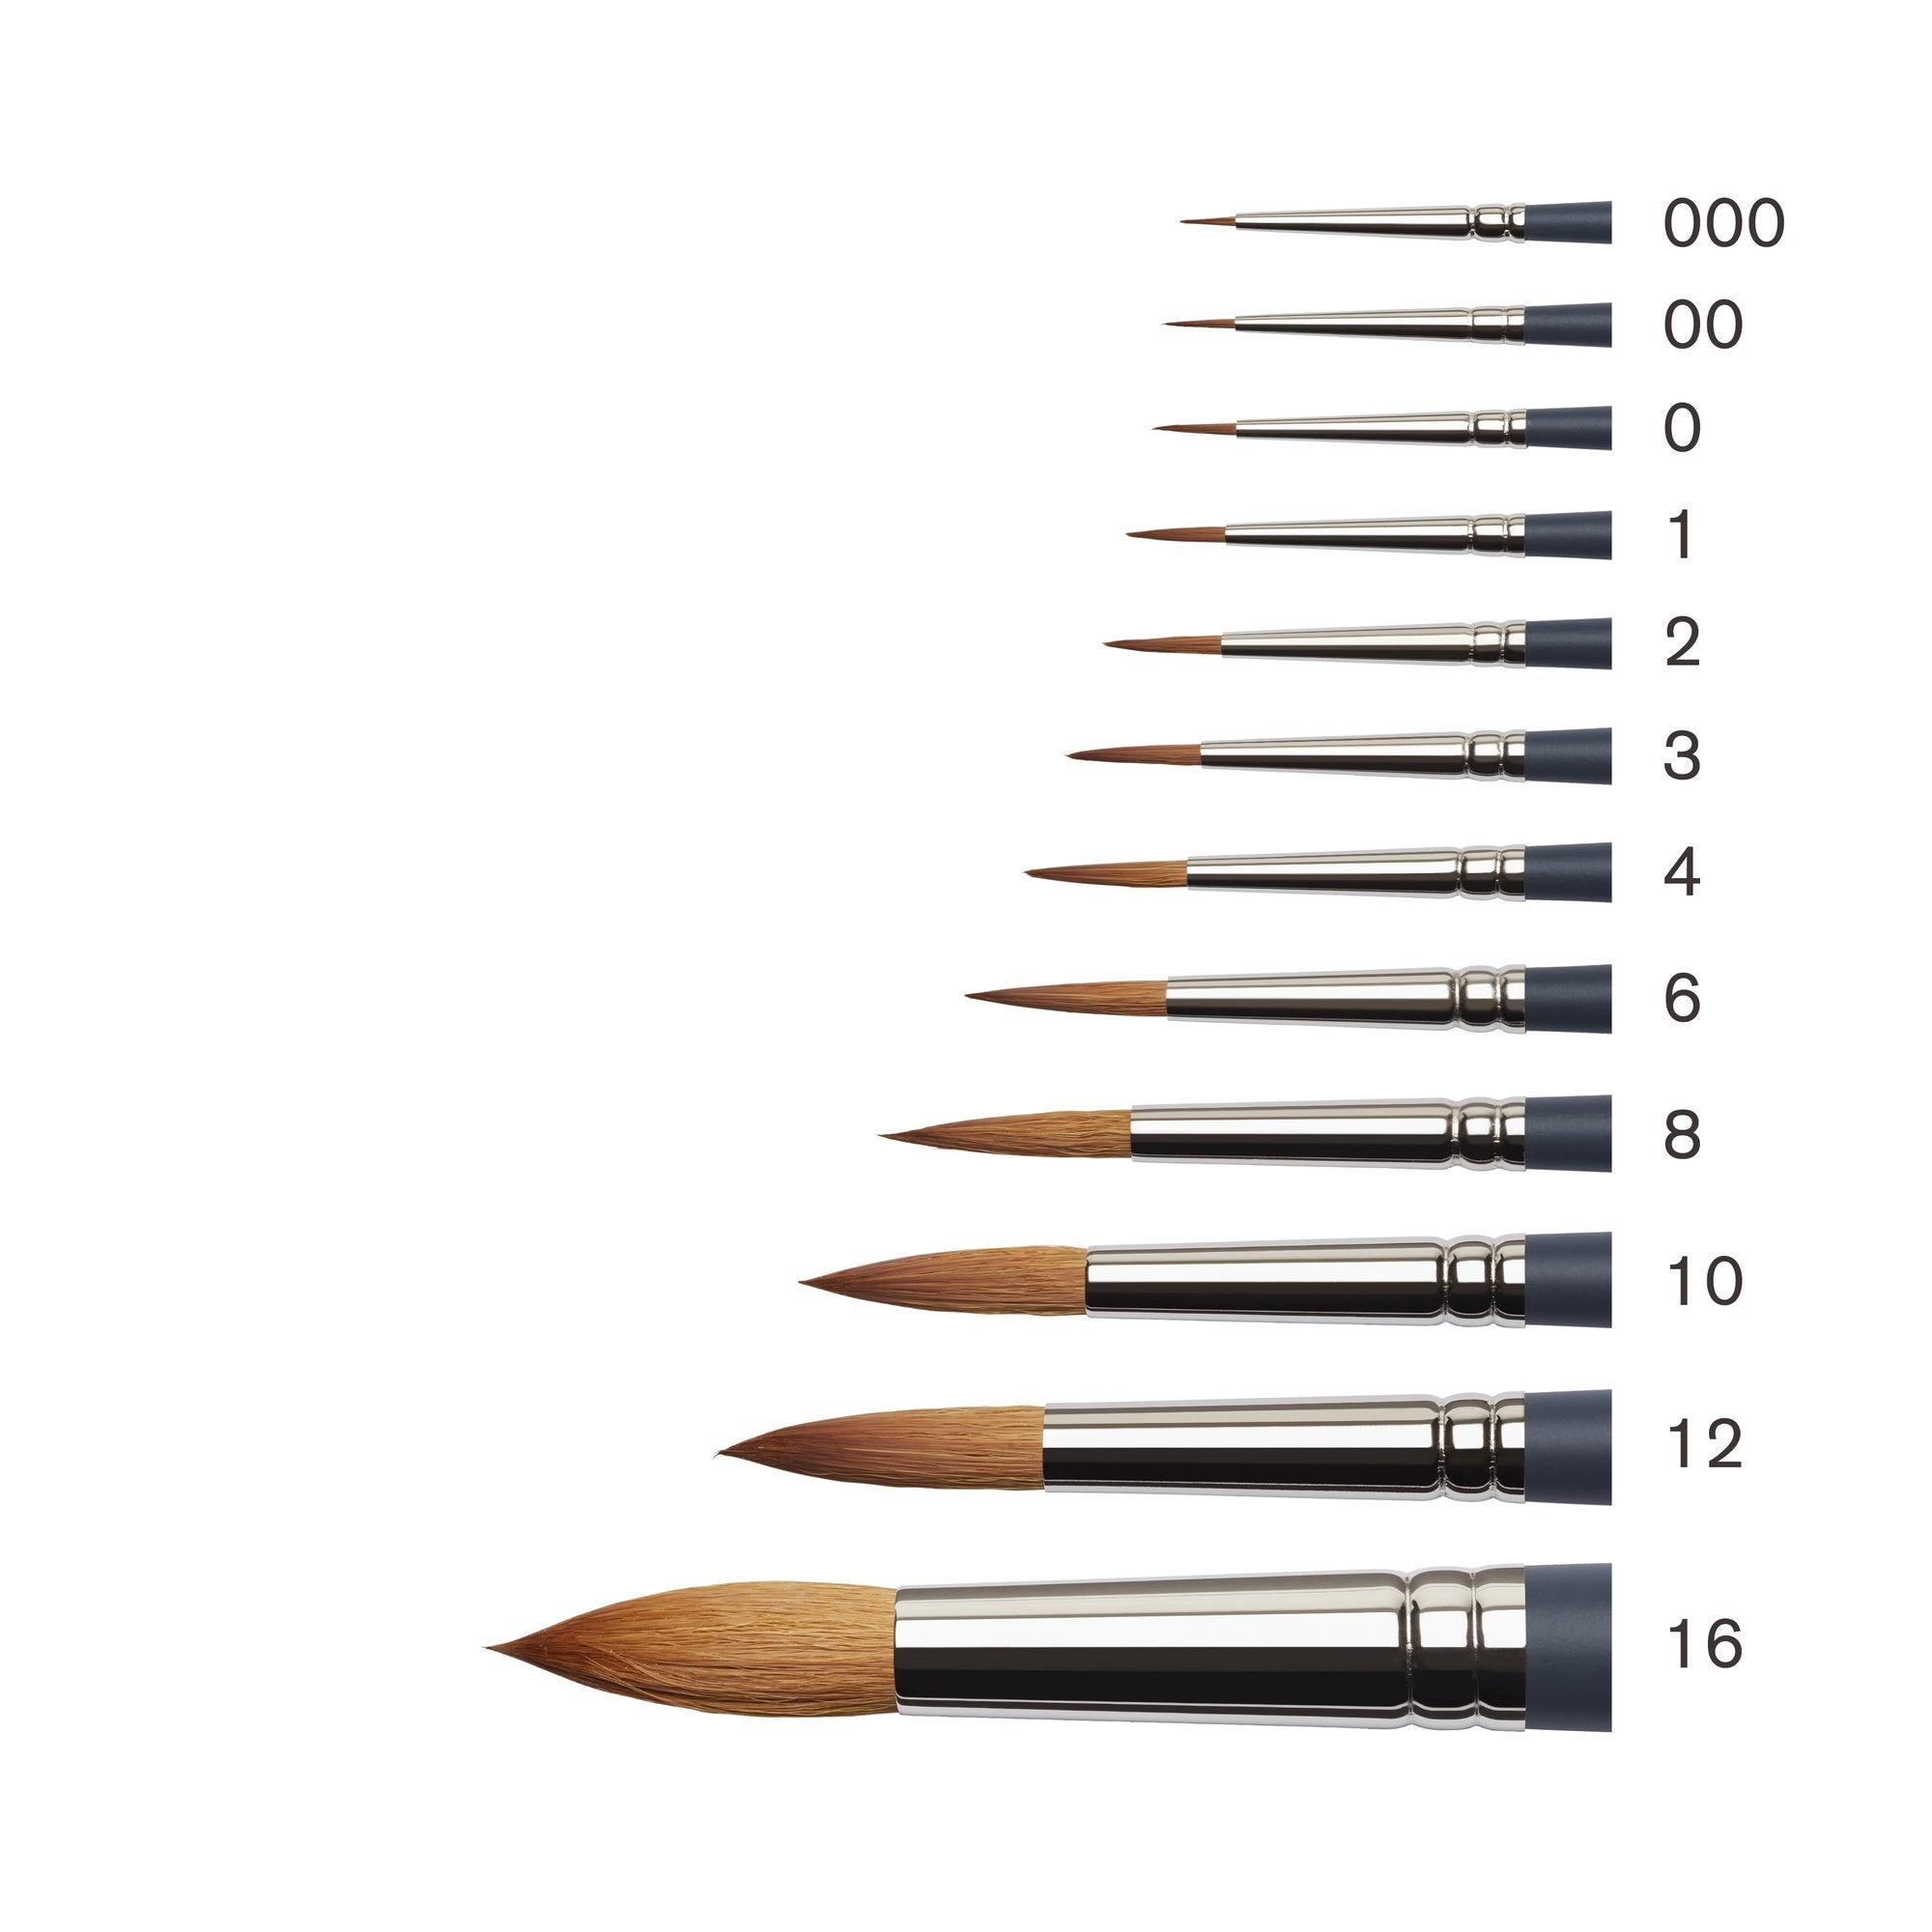 Winsor & Newton have created a new line professional synthetic sable brushes, made using the finest materials to rival natural sable